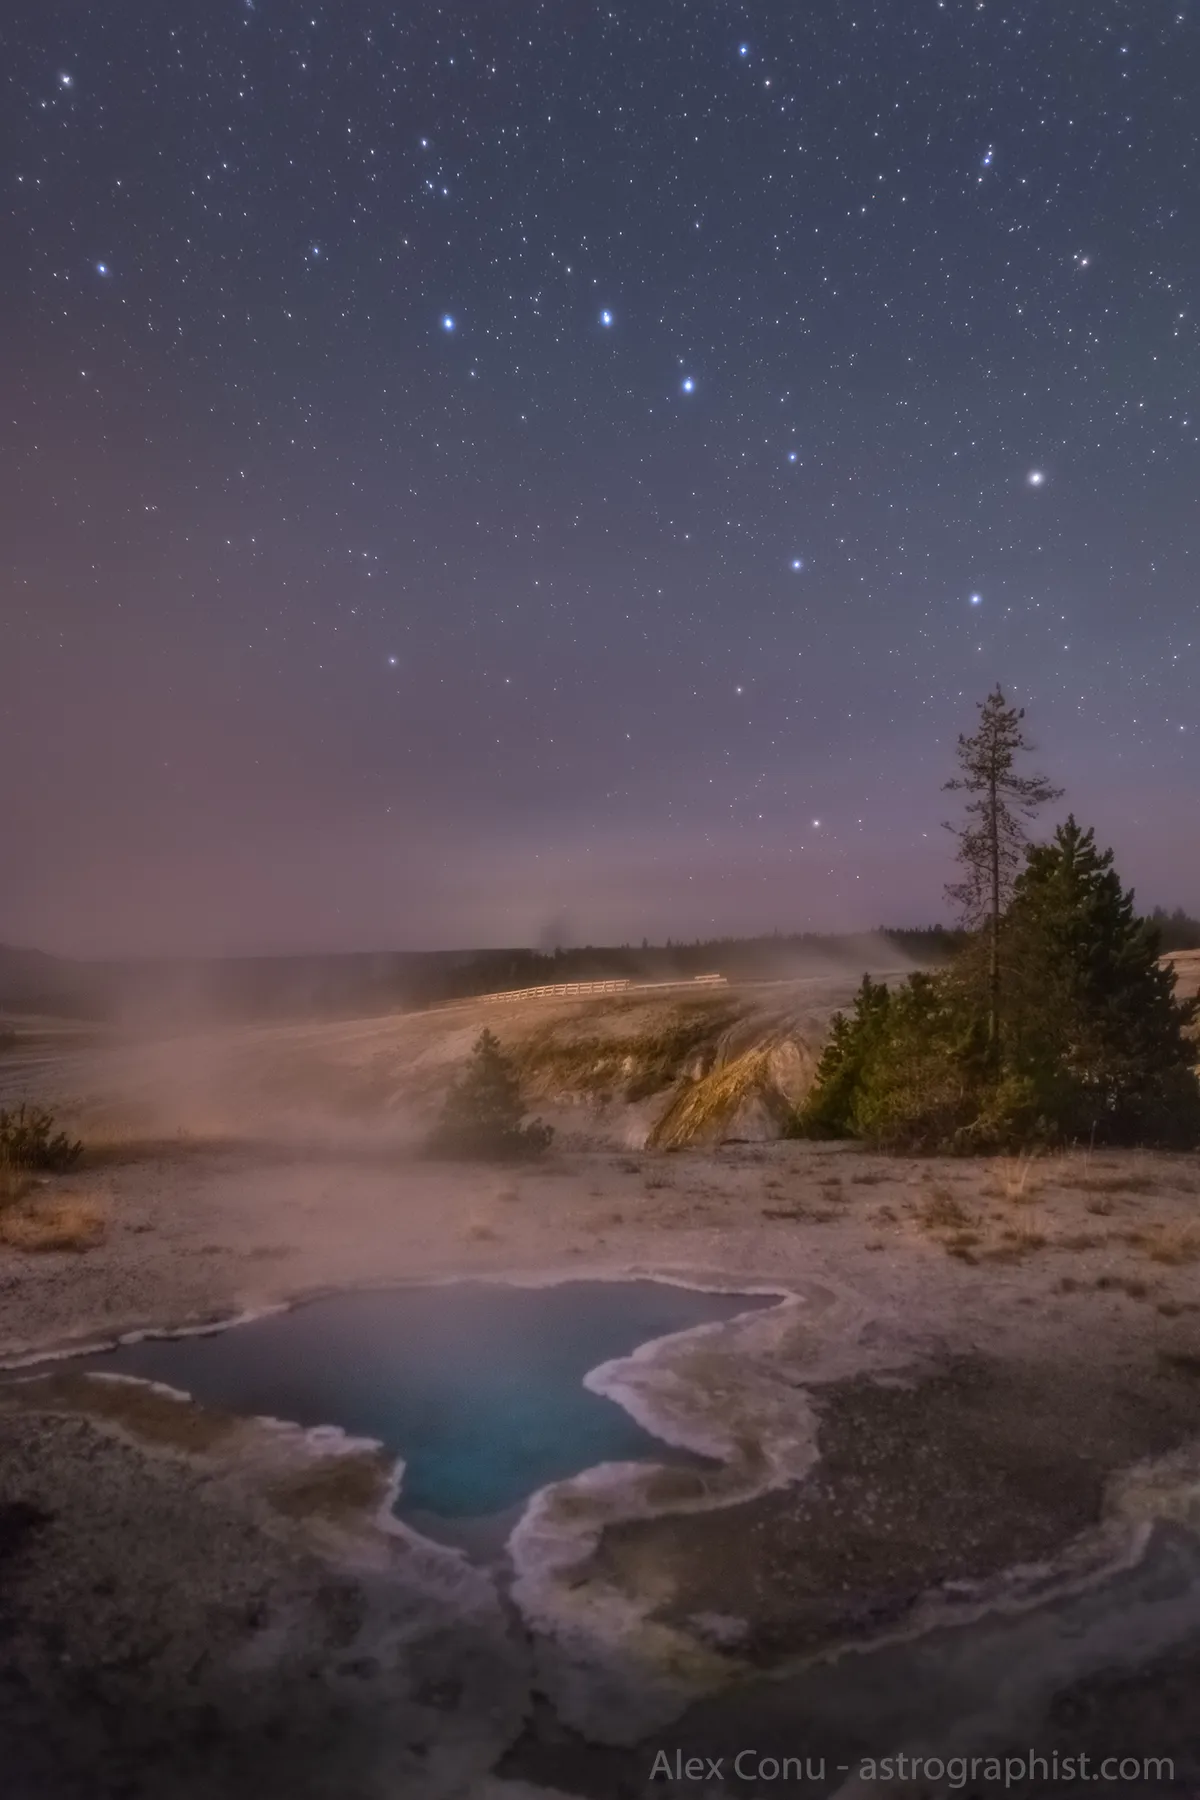 The Big Dipper above the Blue Star Spring by Alex Conu, Yellowstone National Park, USA. Equipment: Canon 6D, Sigma 24mm f/1.4 and Kenko PRO1D Pro Softon filter